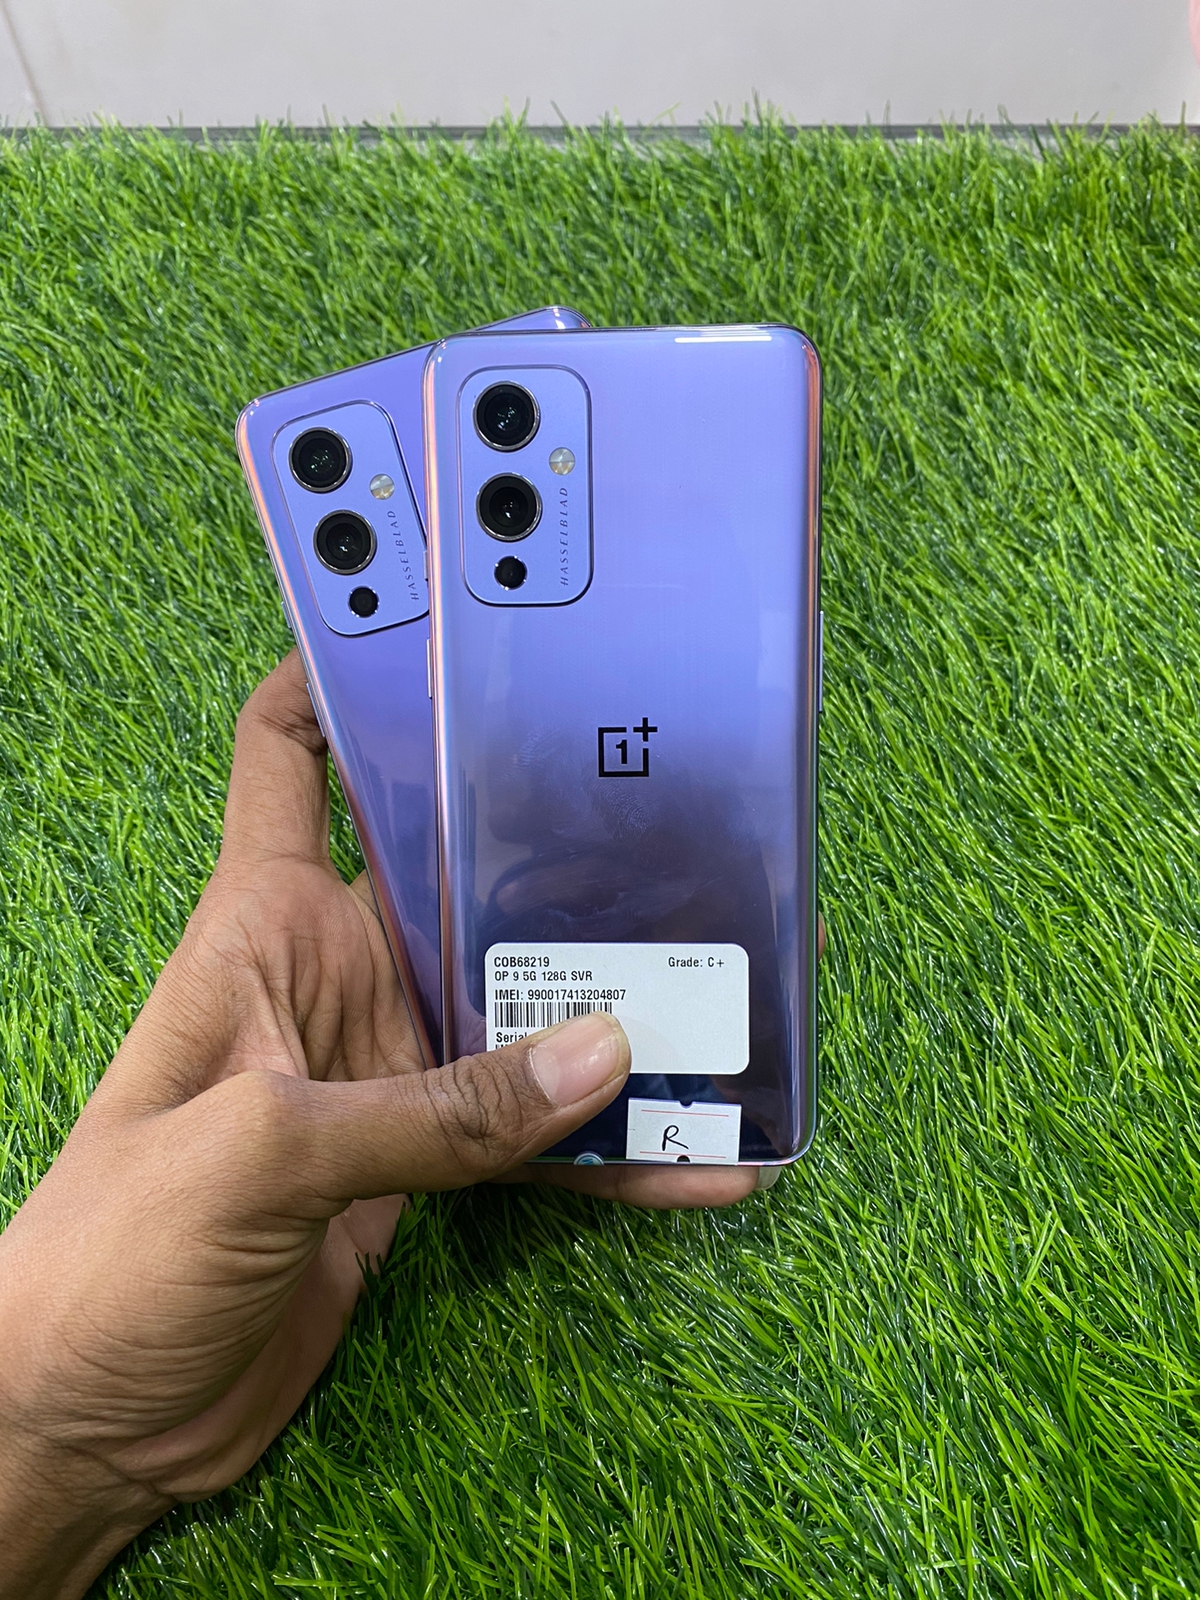 Details View - One plus 9 5g photos - oneplus 9 5g price in India, buy oneplus 9 5g online, affordable 5g smartphone, best smartphone under 30000, oneplus 9 5g features, reliable mobile brand, top-notch performance, 8gb ram mobiles, flagship smartphone deals, value for money phone